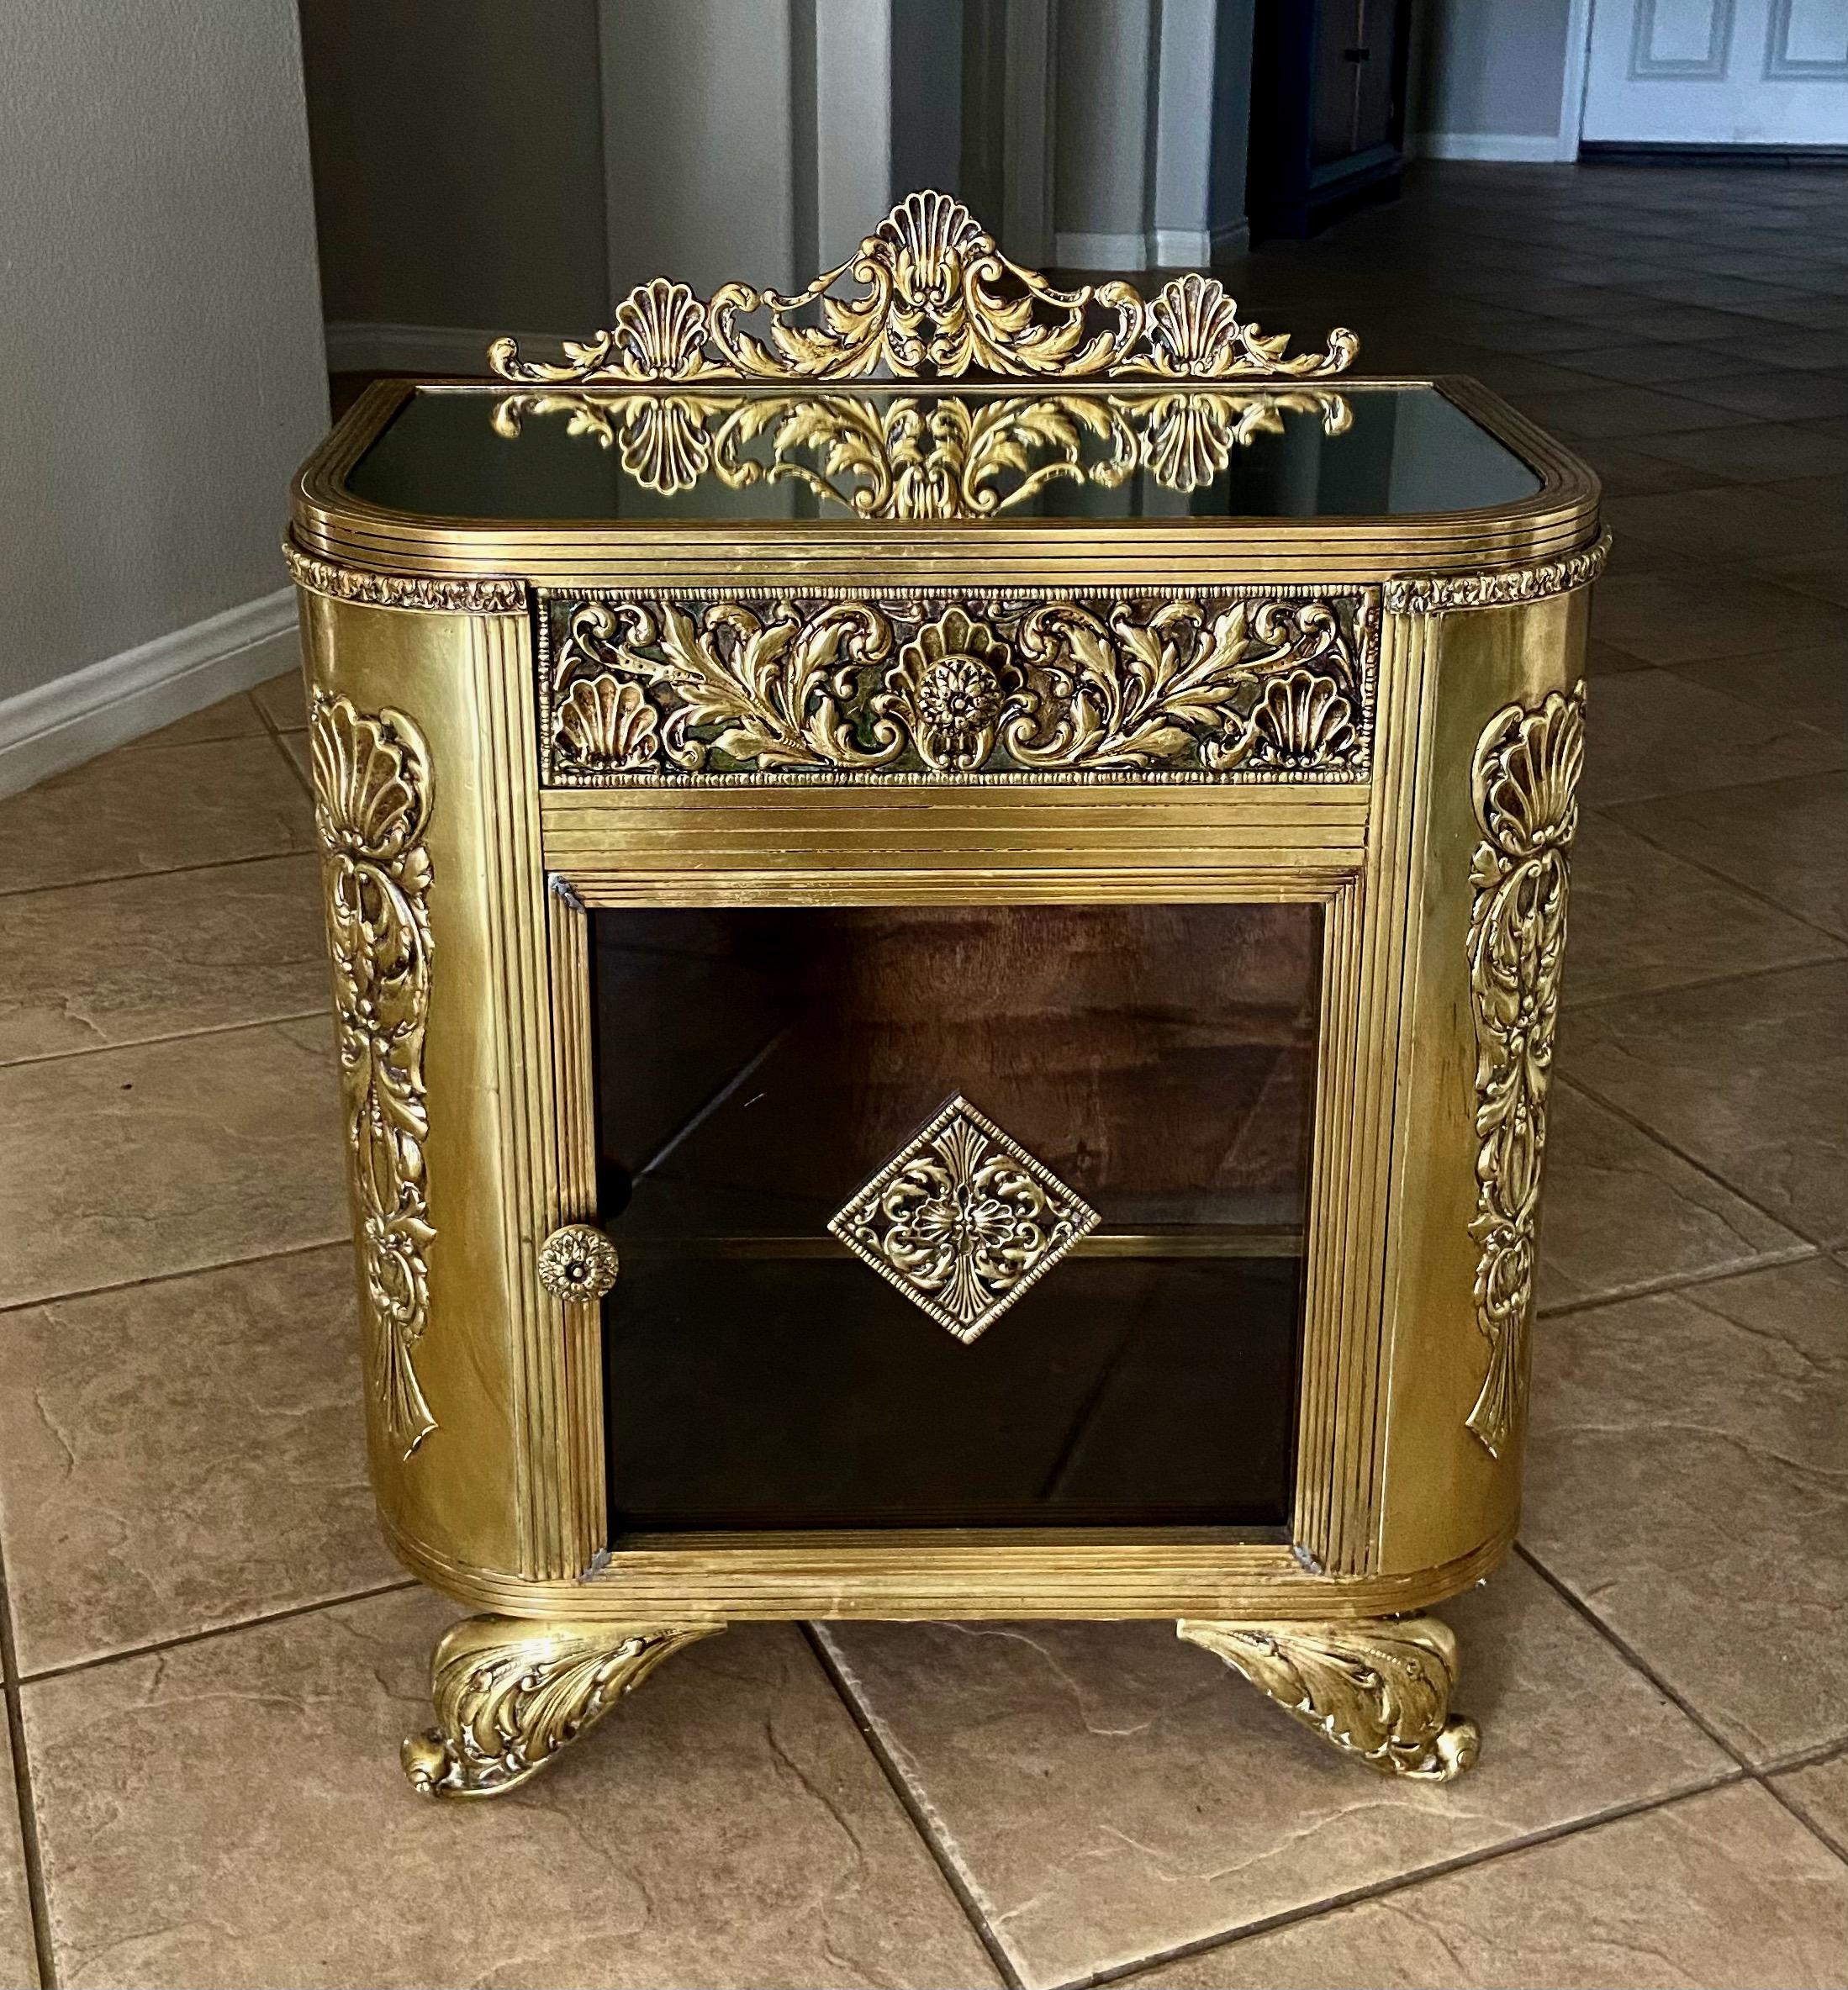 A unique smaller scale French antique brass cabinet with 1 door and 1 pull out drawer. The outer brass cabinet is expertly crafted with filigree elements throughout. The front cabinet door has clear glass with floating brass element in center, each